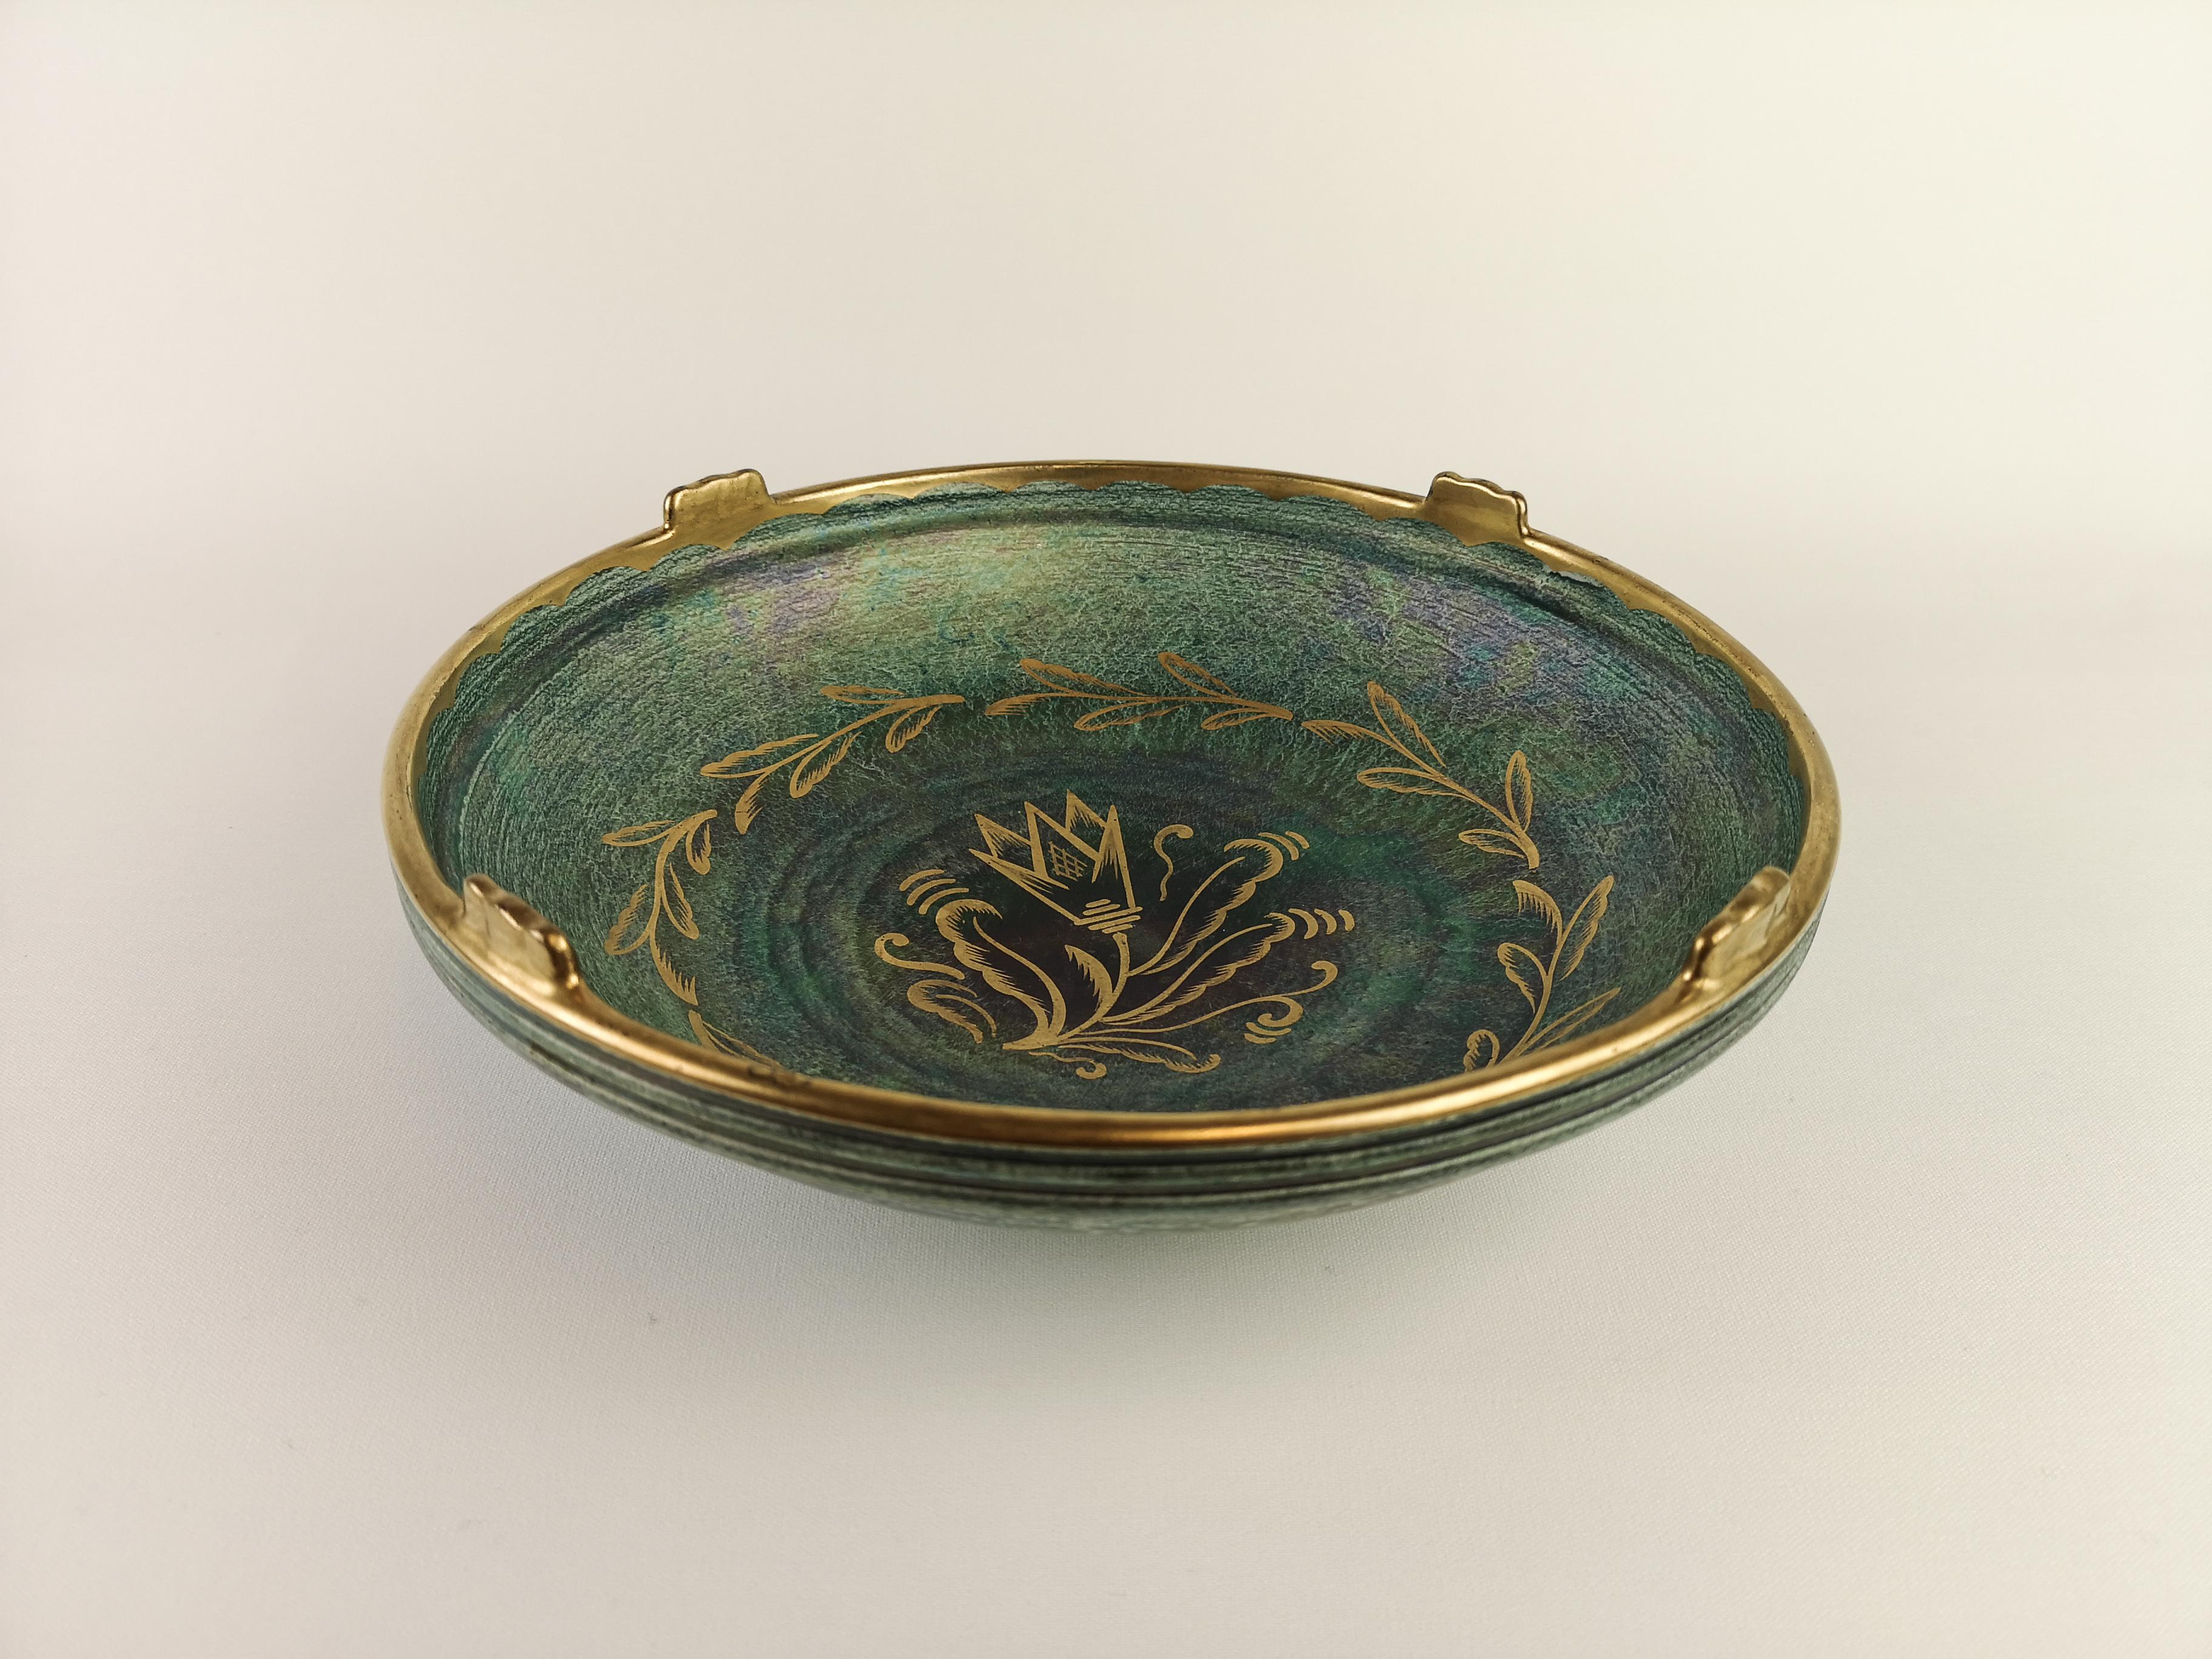 A wonderful bowl created by Josef Ekberg and manufactured by Gustavsberg Sweden in 1920s. Wonderful green glaze with hand painted gold pattern on the bowl. 

On marke on the edge of the bowl otherwise in excellent condition.